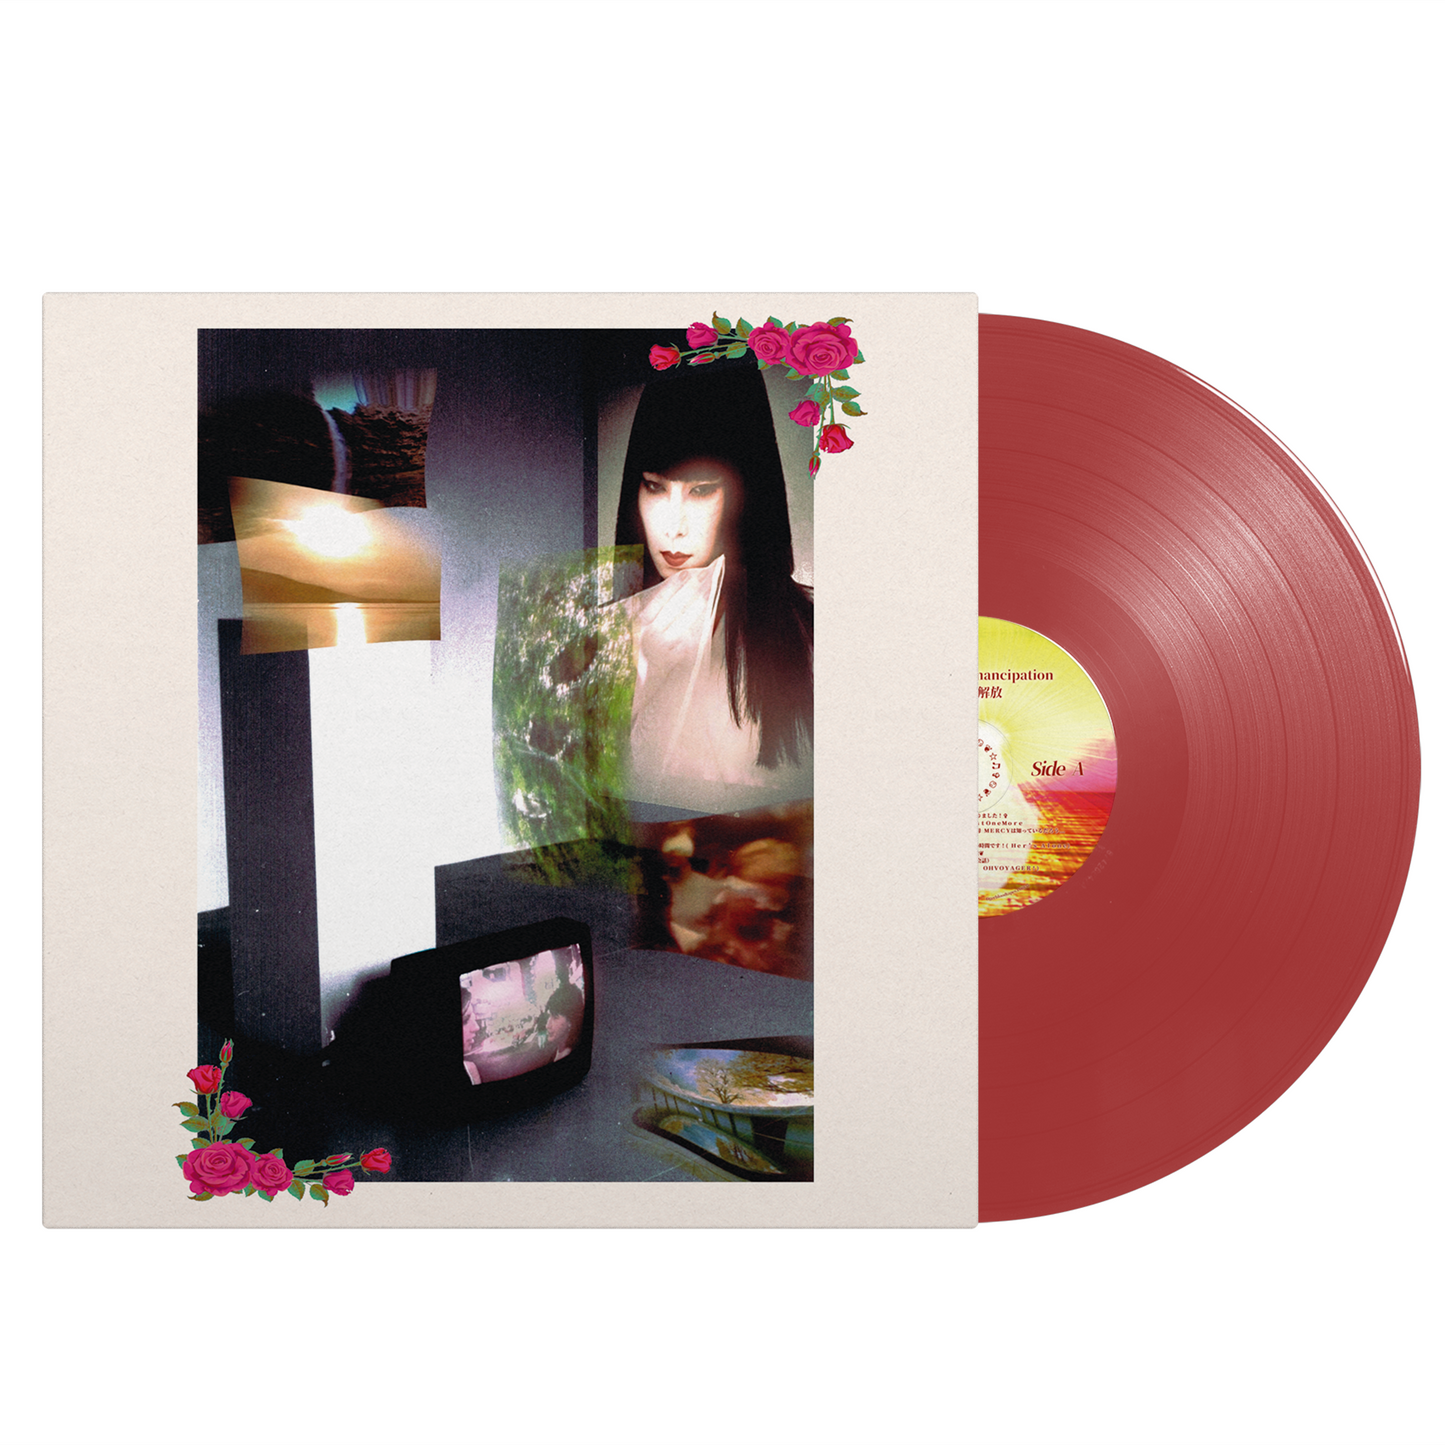 Immaculate Emancipation - "無原罪の解放 + Introduction to Riddles of The Revered Lady" Ruby Red Limited Edition 12" Vinyl LP